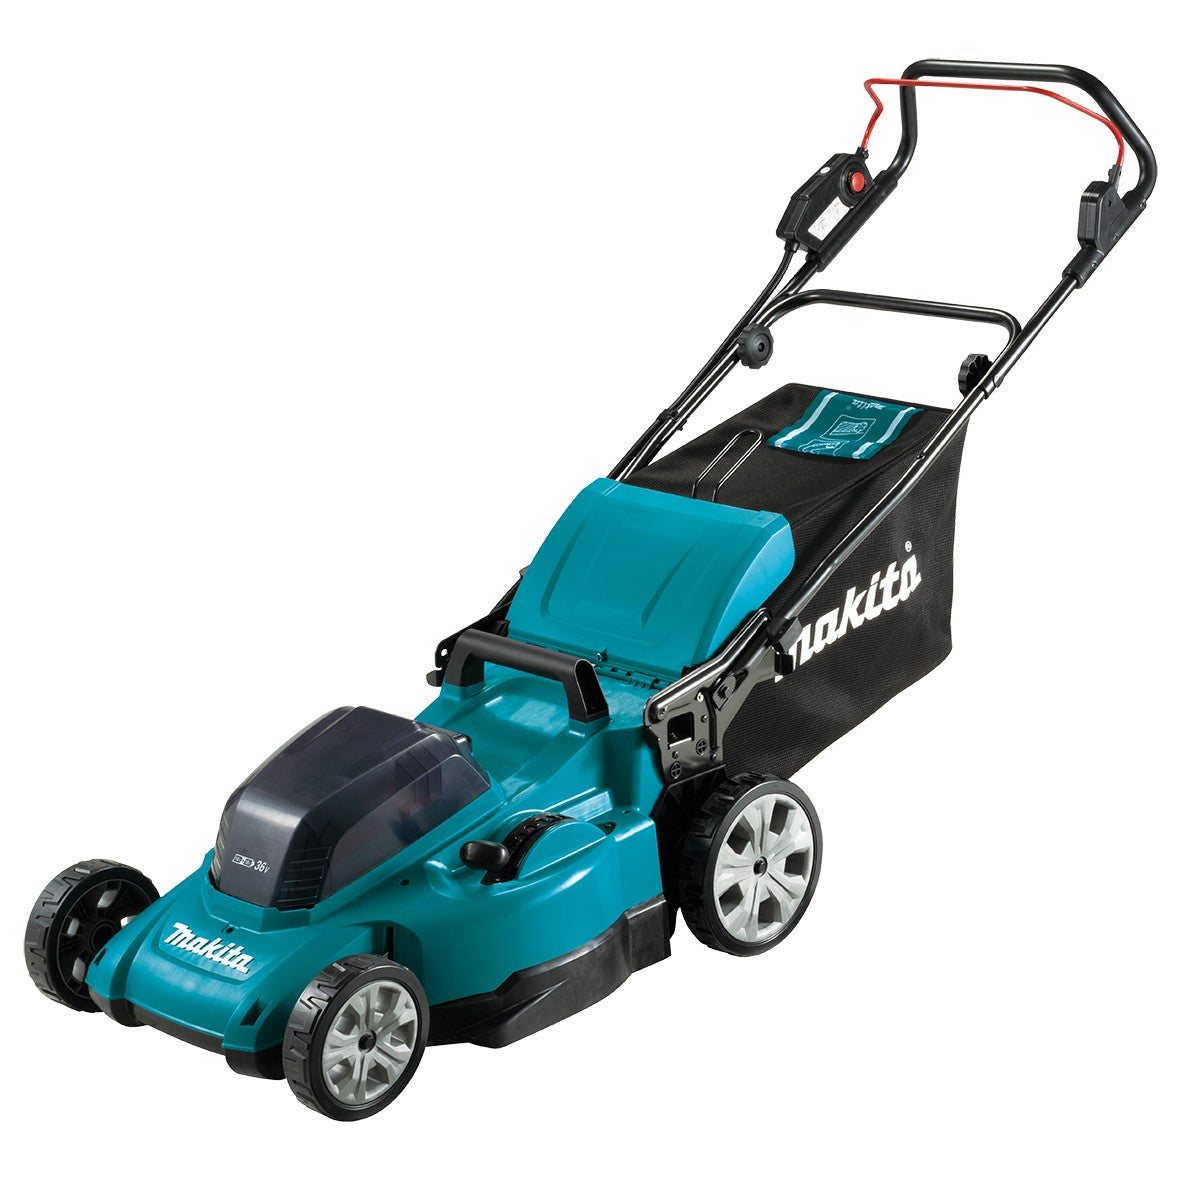 18Vx2 480mm (19") Lawn Mower Bare (Tool Only) DLM480Z by Makita